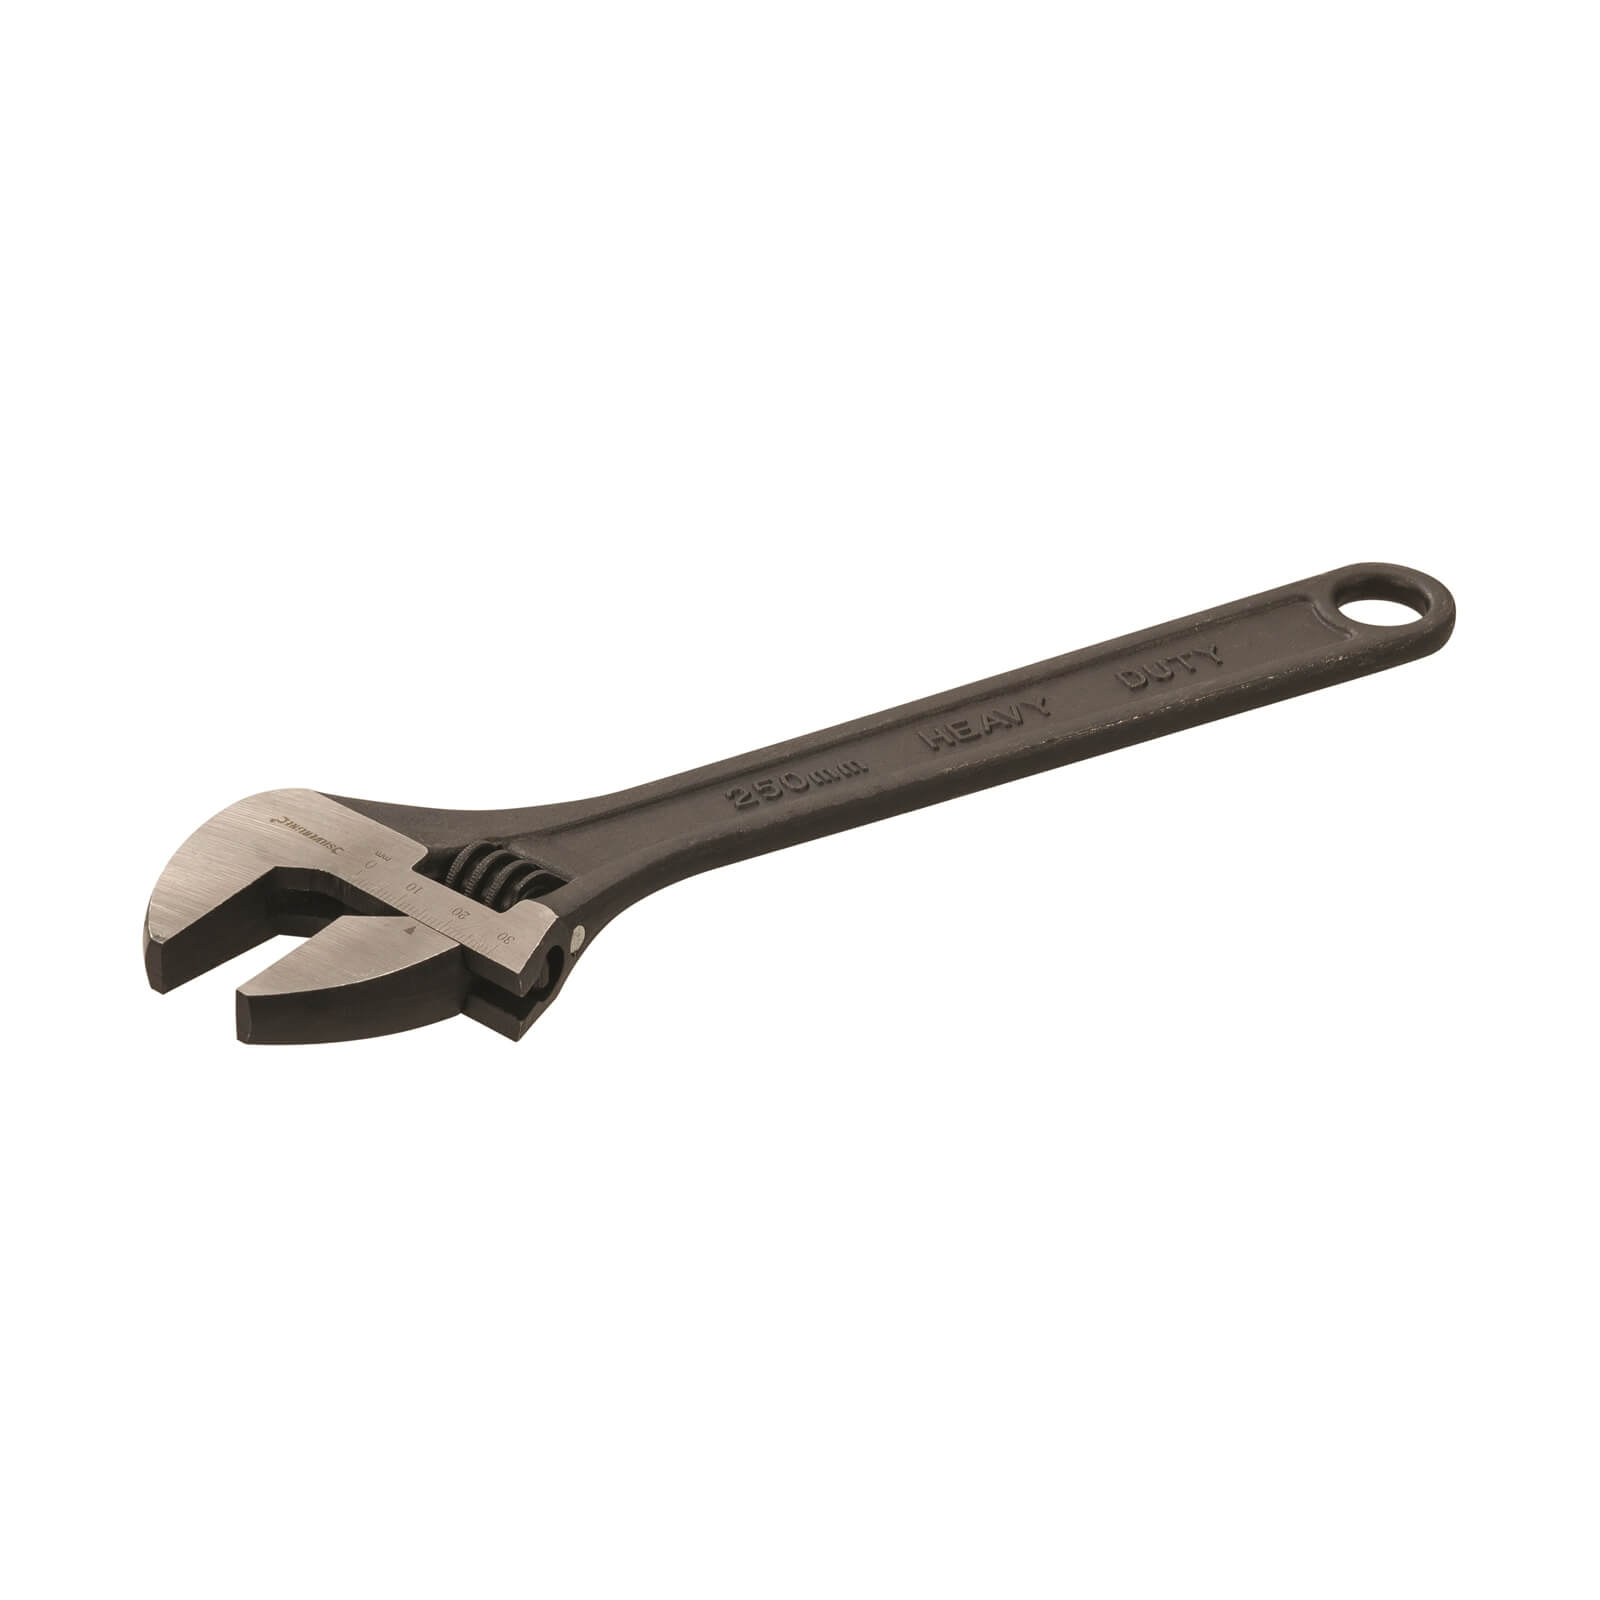 Silverline Expert Adjustable Wrench 200mm Jaw 22mm